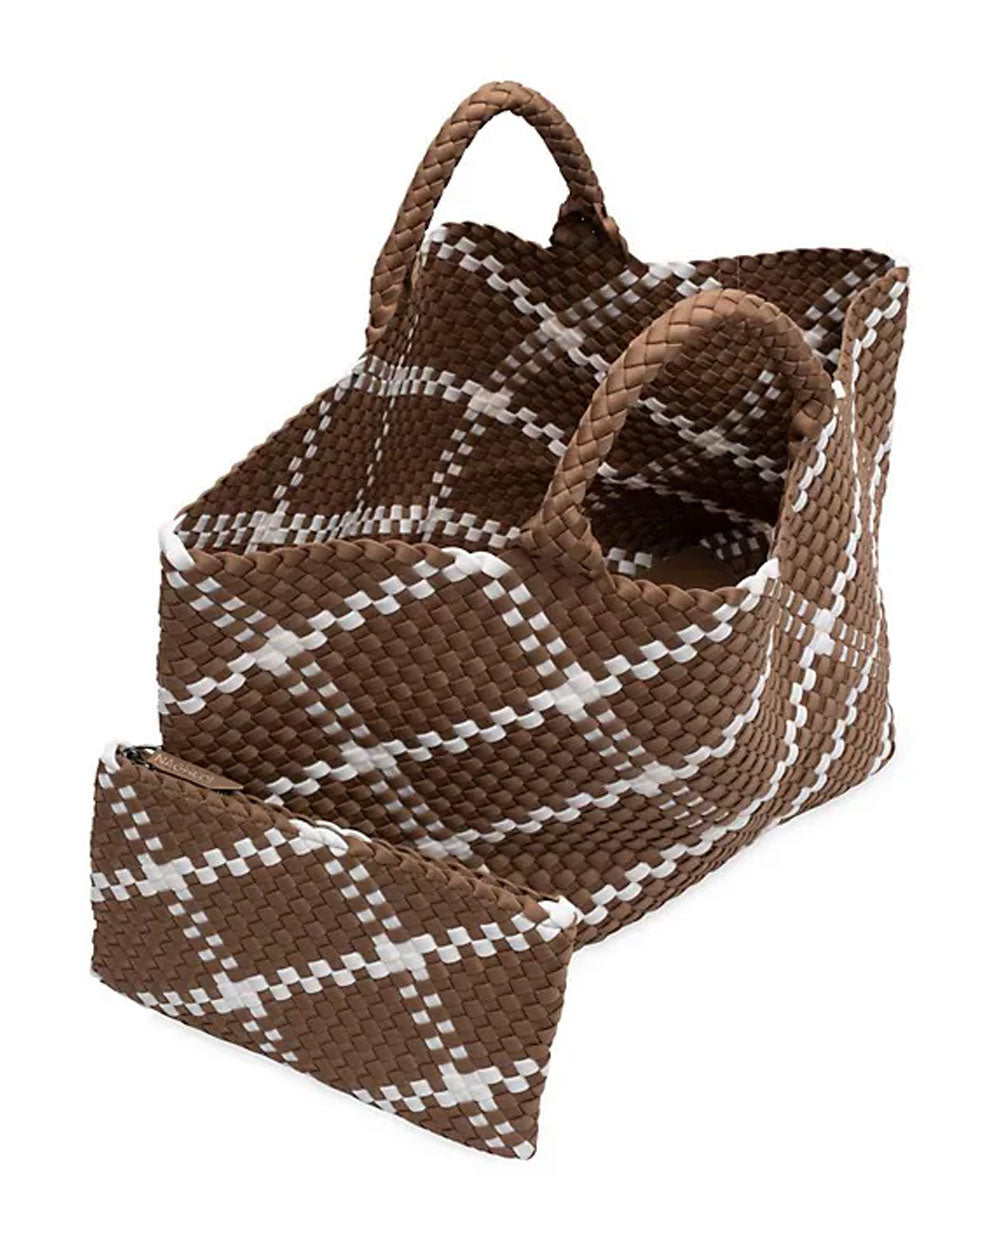 St. Barth’s Large Plaid Tote in Cacao